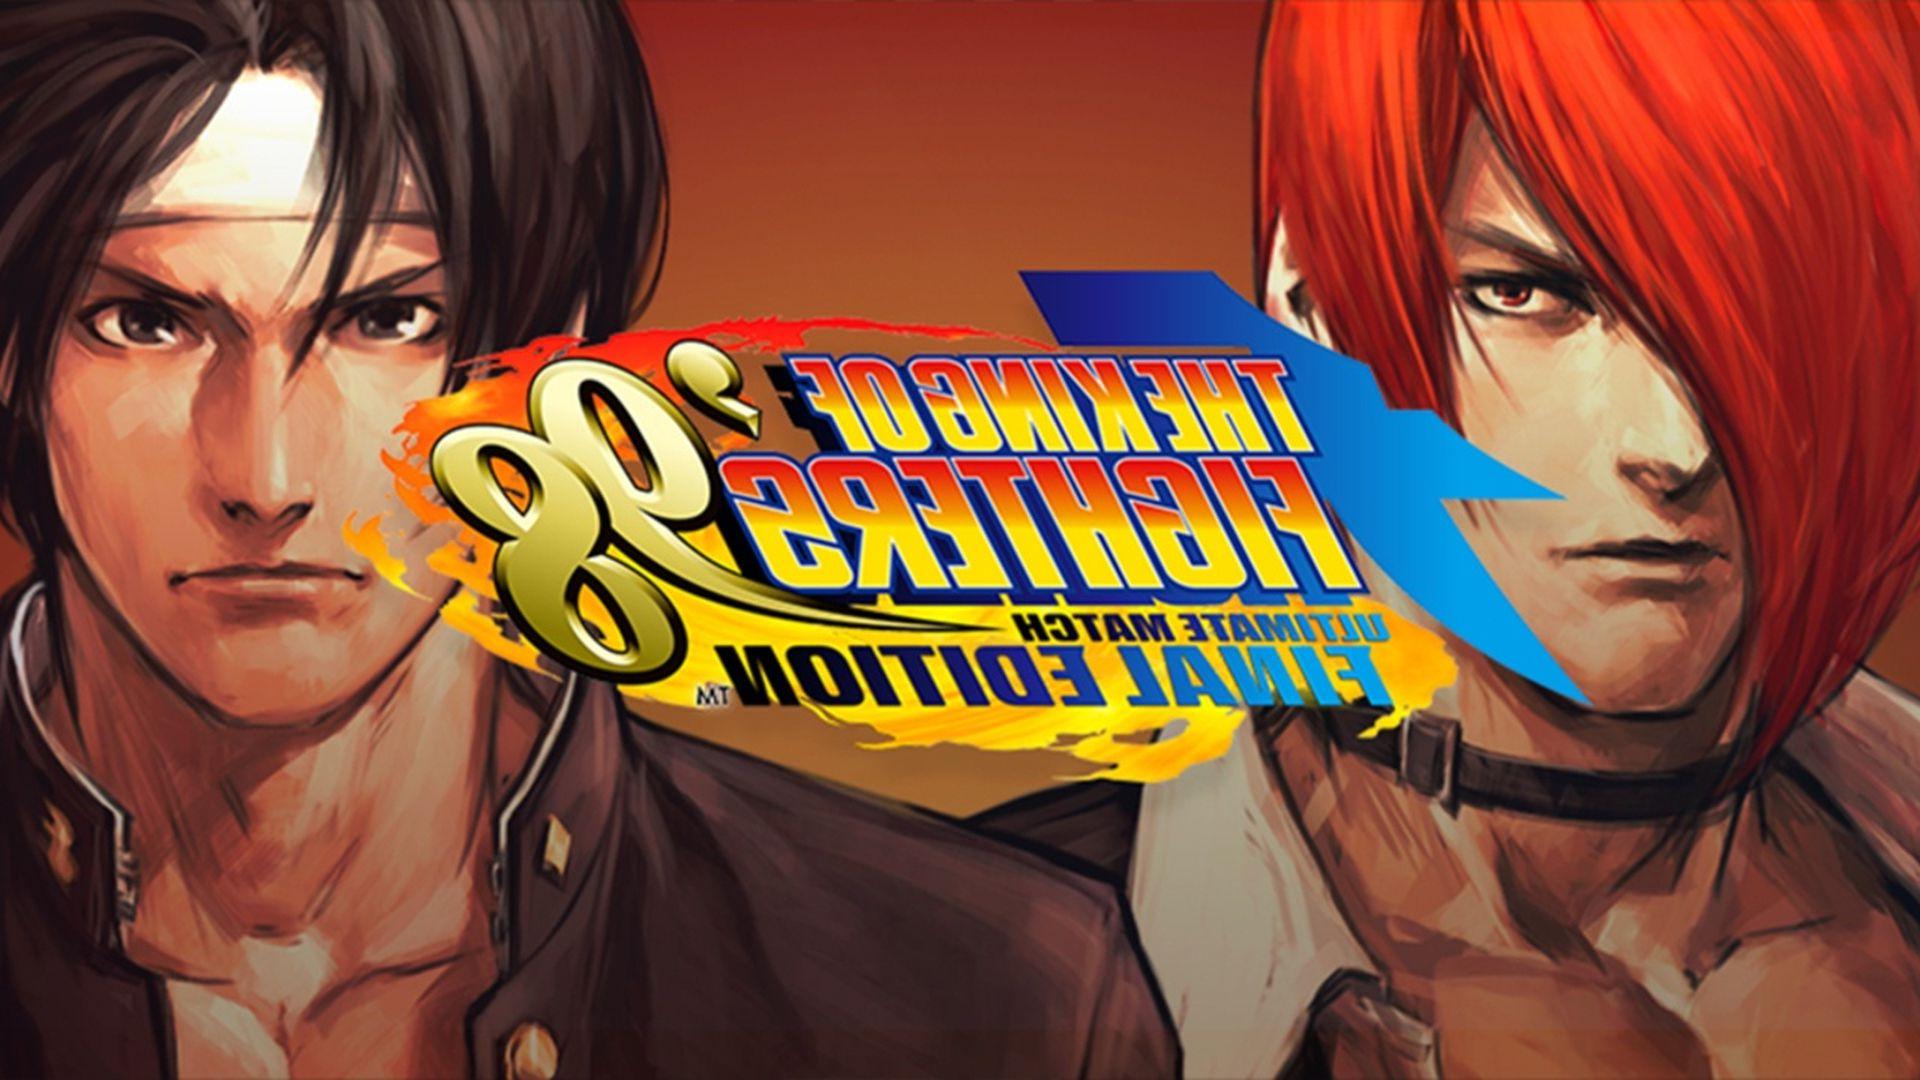 The King of Fighters '98 Ultimate Match Final Edition Available